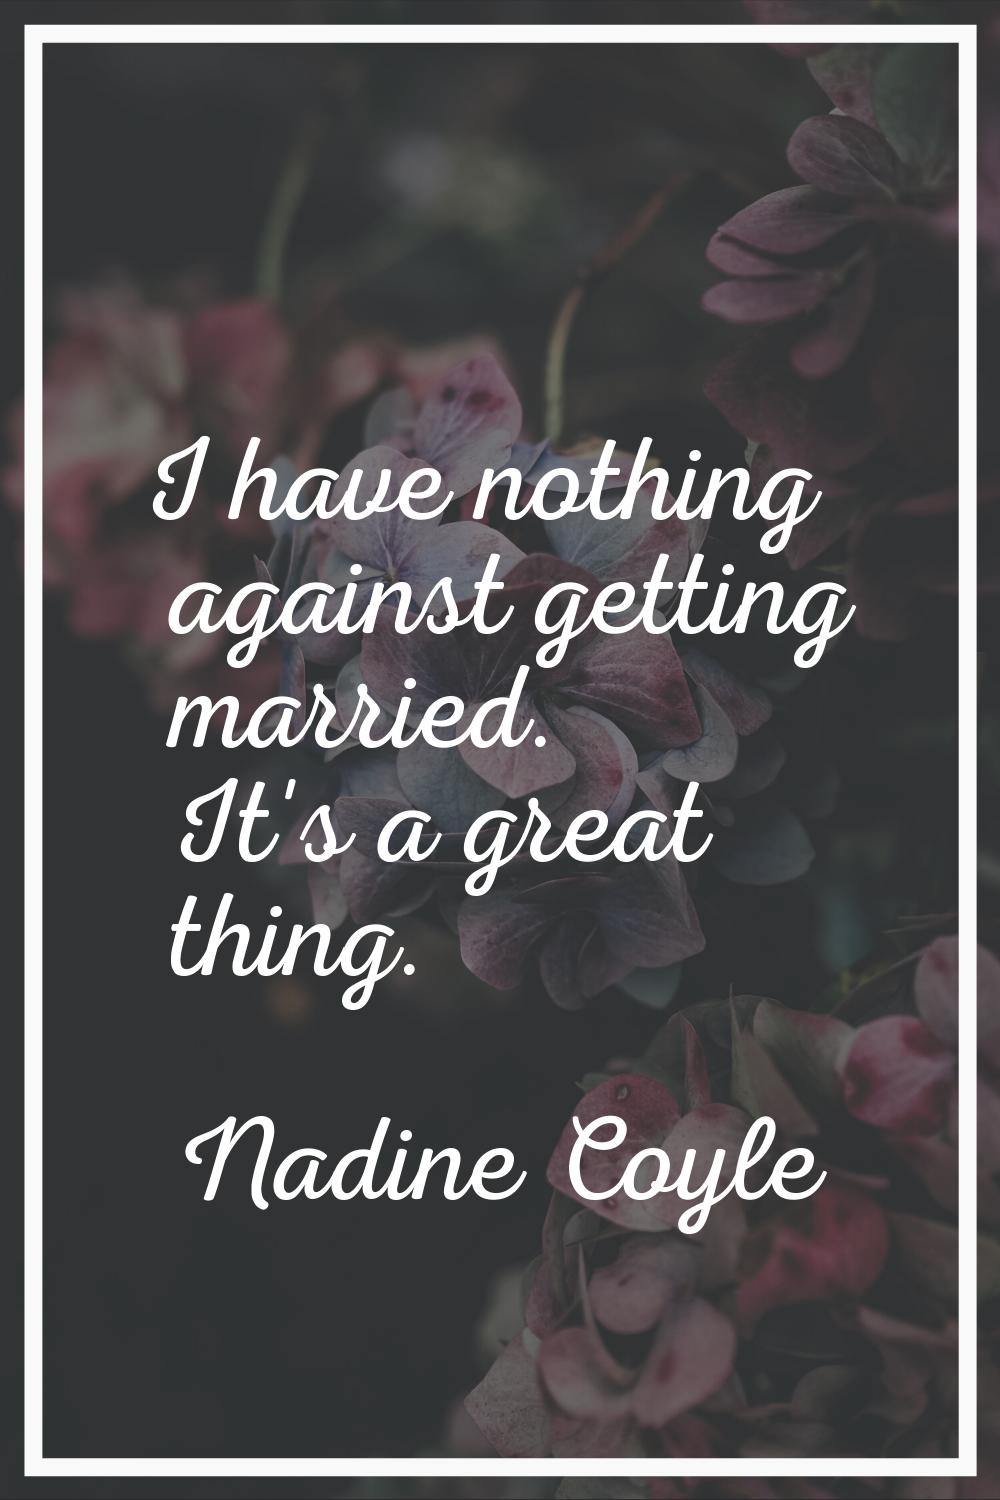 I have nothing against getting married. It's a great thing.